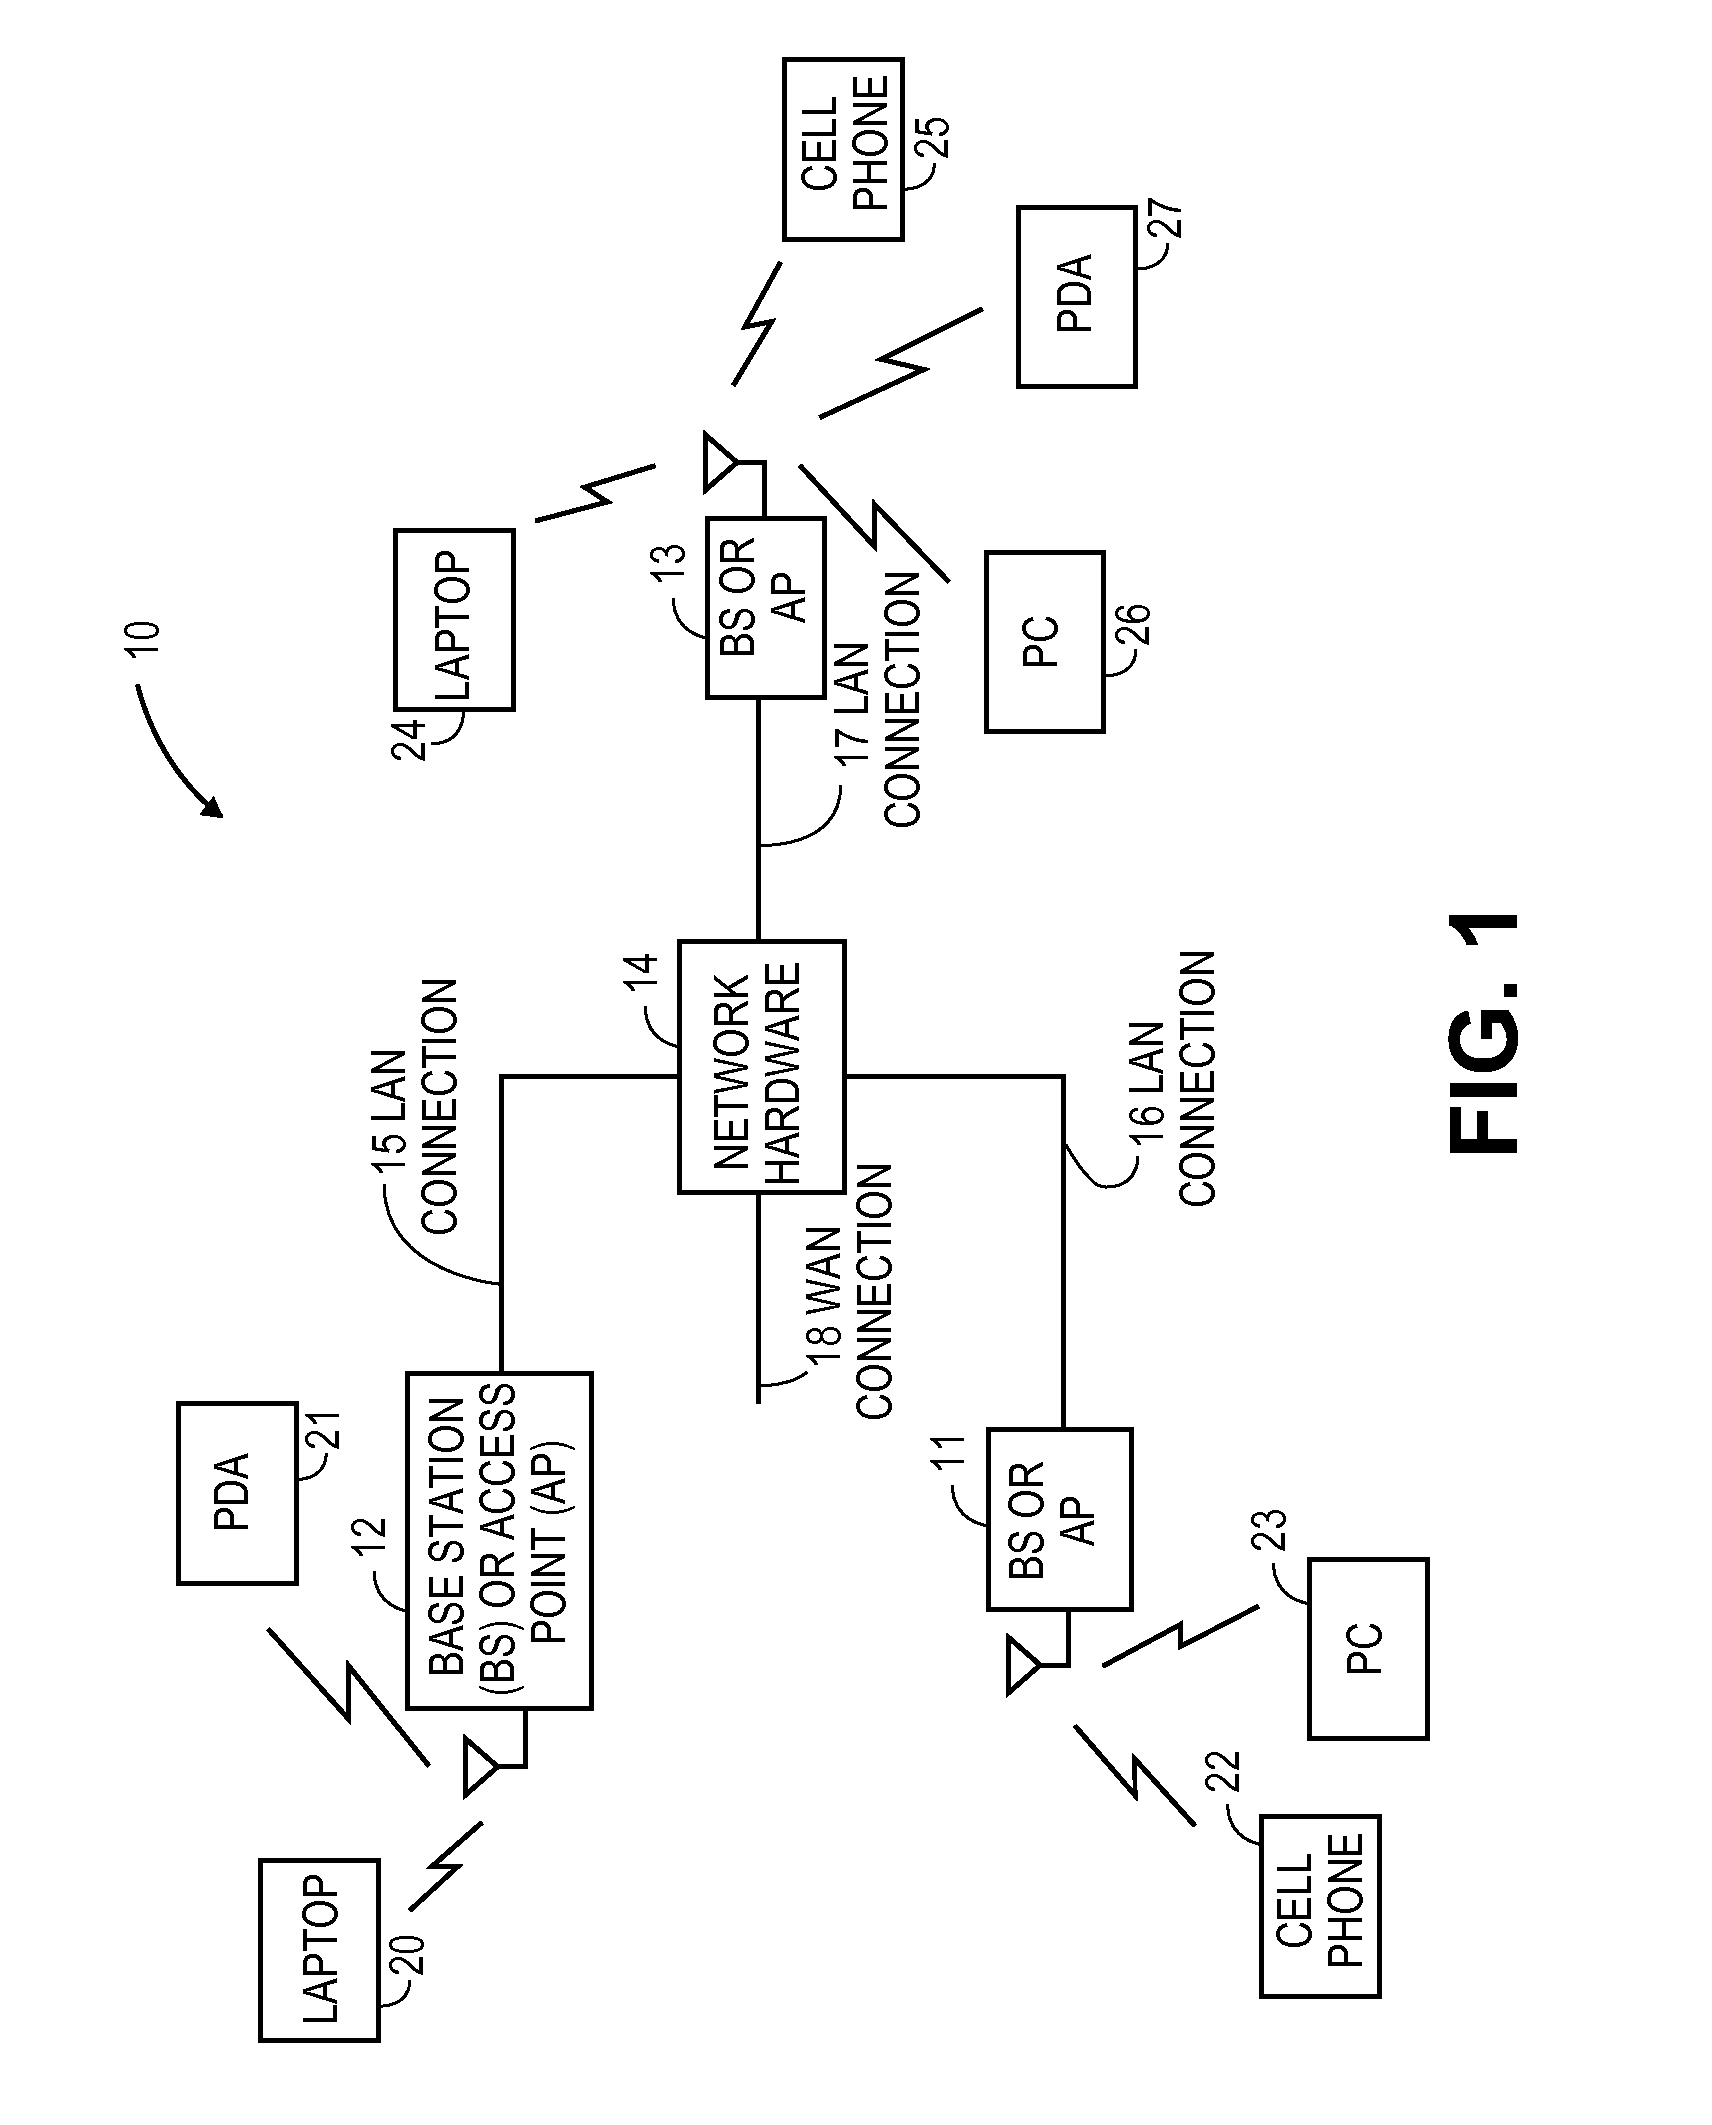 Distortion cancellation in radio receivers using I/Q correction